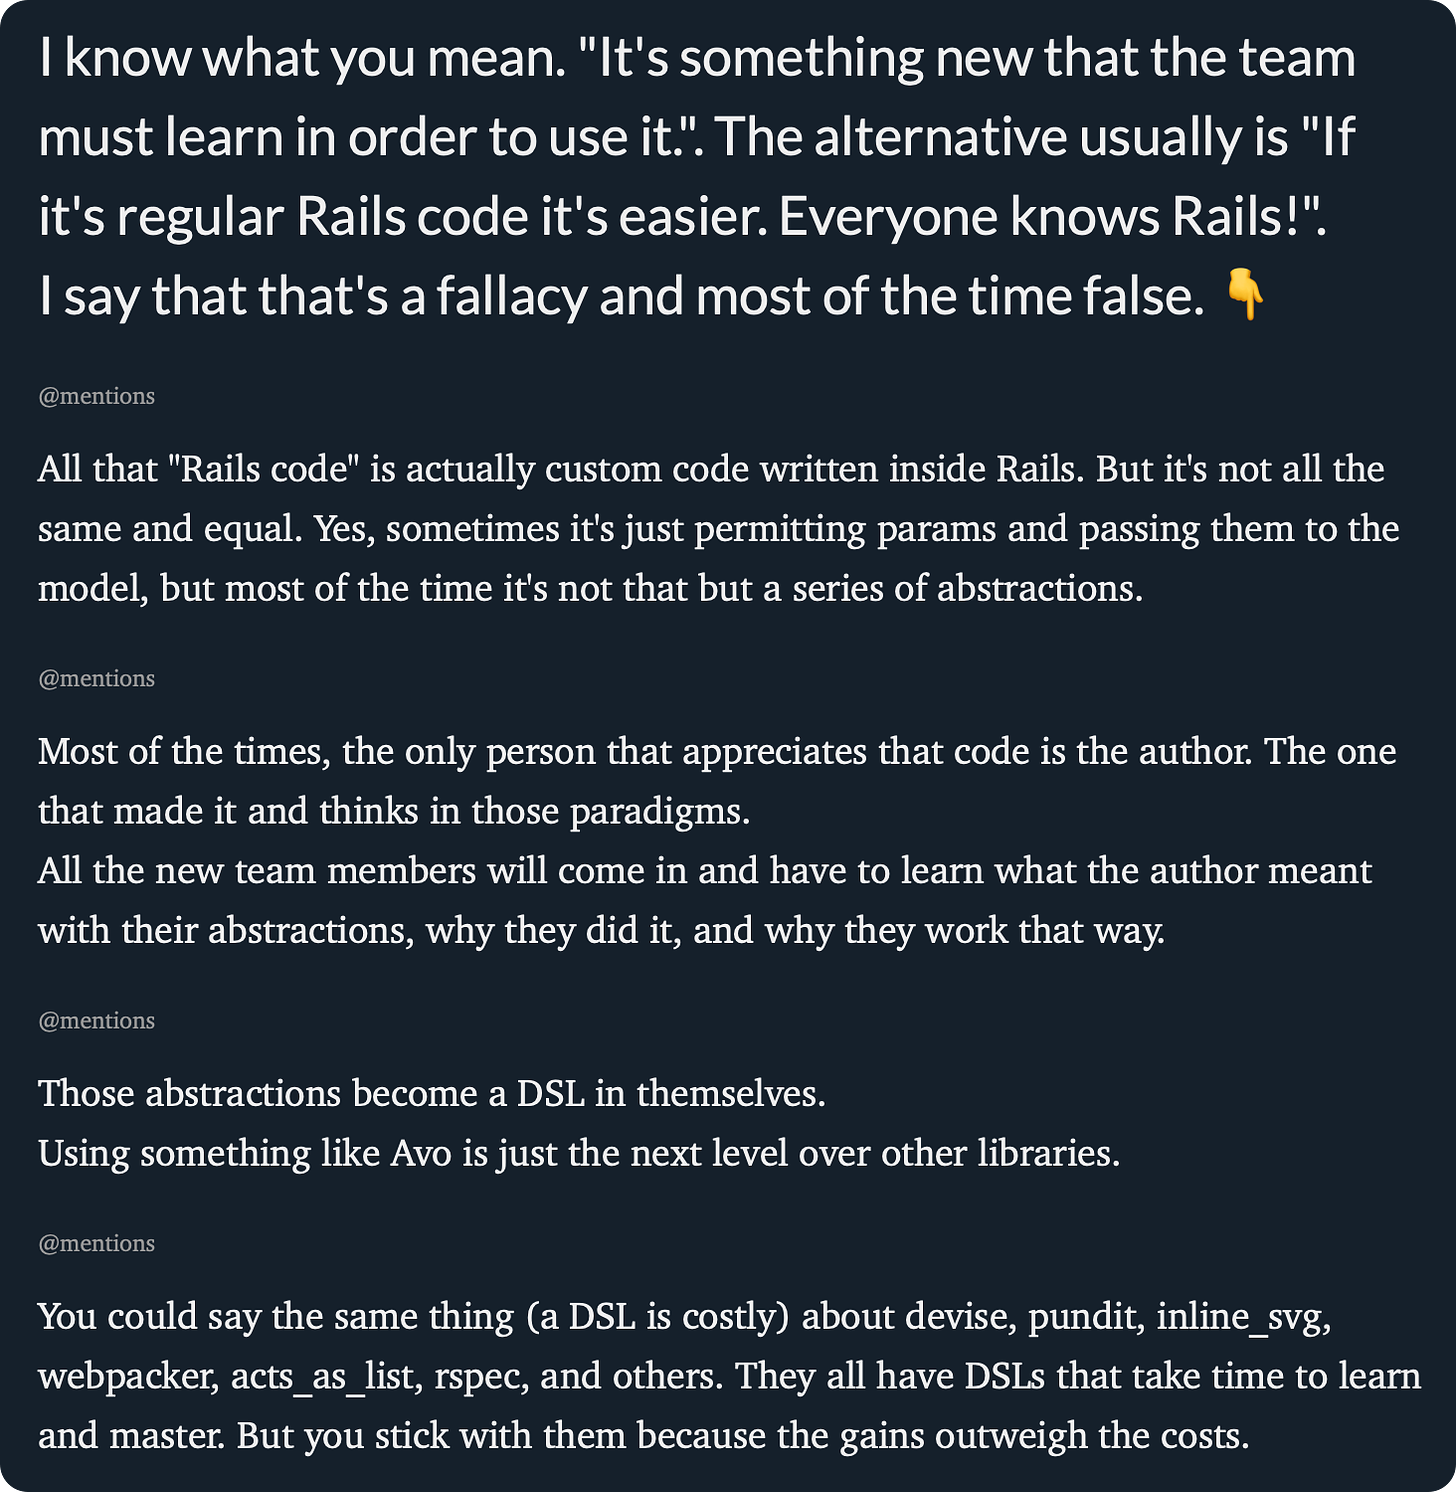 I know what you mean. "It's something new that the team must learn in order to use it.". The alternative usually is "If it's regular Rails code it's easier. Everyone knows Rails!". I say that that's a fallacy and most of the time false. 👇  @mentions All that "Rails code" is actually custom code written inside Rails. But it's not all the same and equal. Yes, sometimes it's just permitting params and passing them to the model, but most of the time it's not that but a series of abstractions.  @mentions Most of the times, the only person that appreciates that code is the author. The one that made it and thinks in those paradigms. All the new team members will come in and have to learn what the author meant with their abstractions, why they did it, and why they work that way.  @mentions Those abstractions become a DSL in themselves. Using something like Avo is just the next level over other libraries.  @mentions You could say the same thing (a DSL is costly) about devise, pundit, inline_svg, webpacker, acts_as_list, rspec, and others. They all have DSLs that take time to learn and master. But you stick with them because the gains outweigh the costs. 